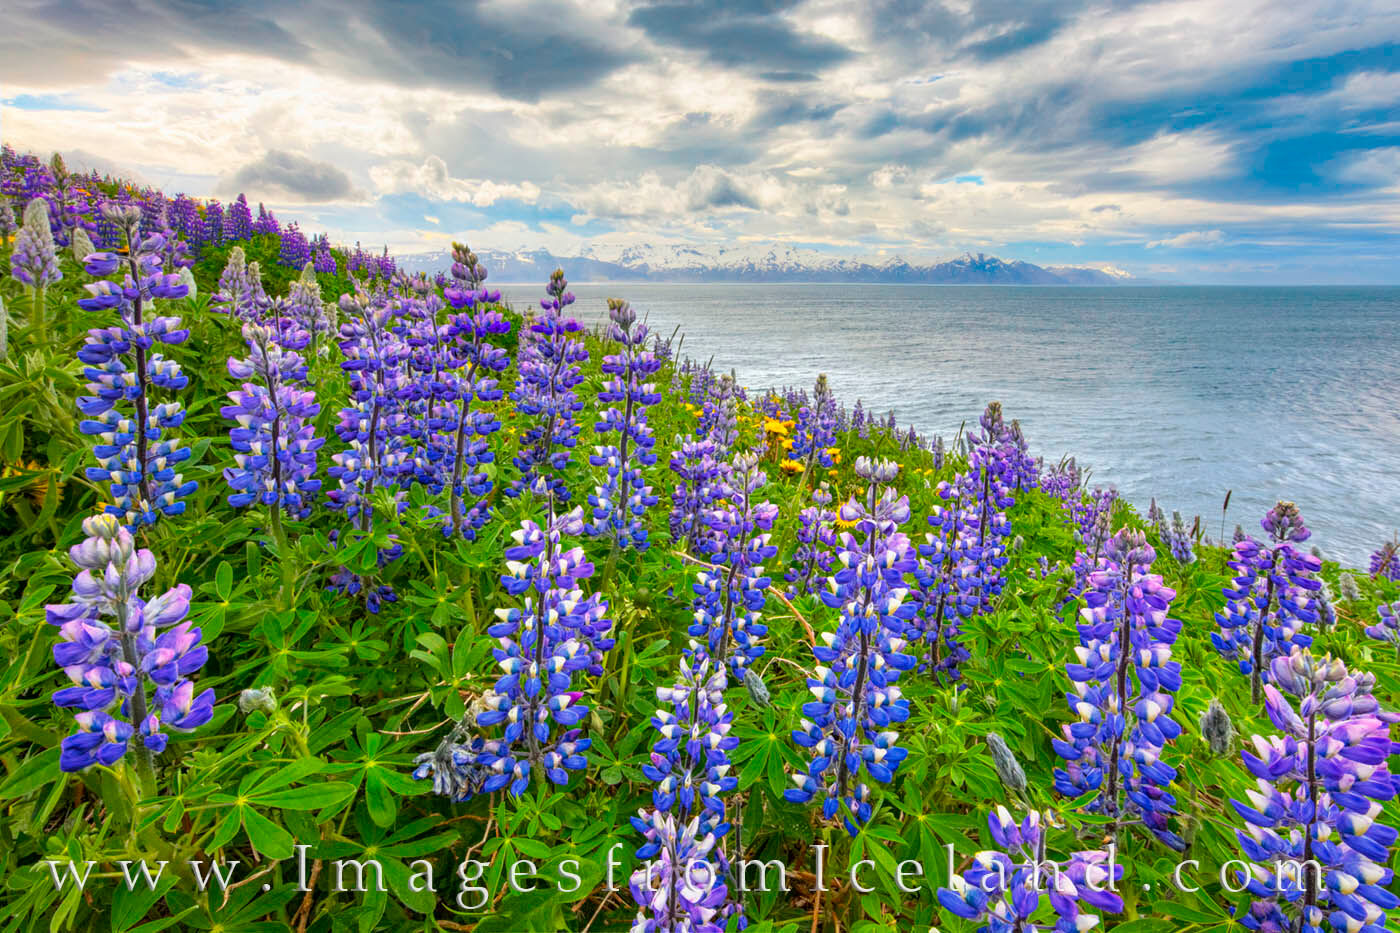 On a cold June afternoon, nootka (also known as lupine) overlook Skjálfandi Bay near Husavik, Iceland. The self-proclaimed "...